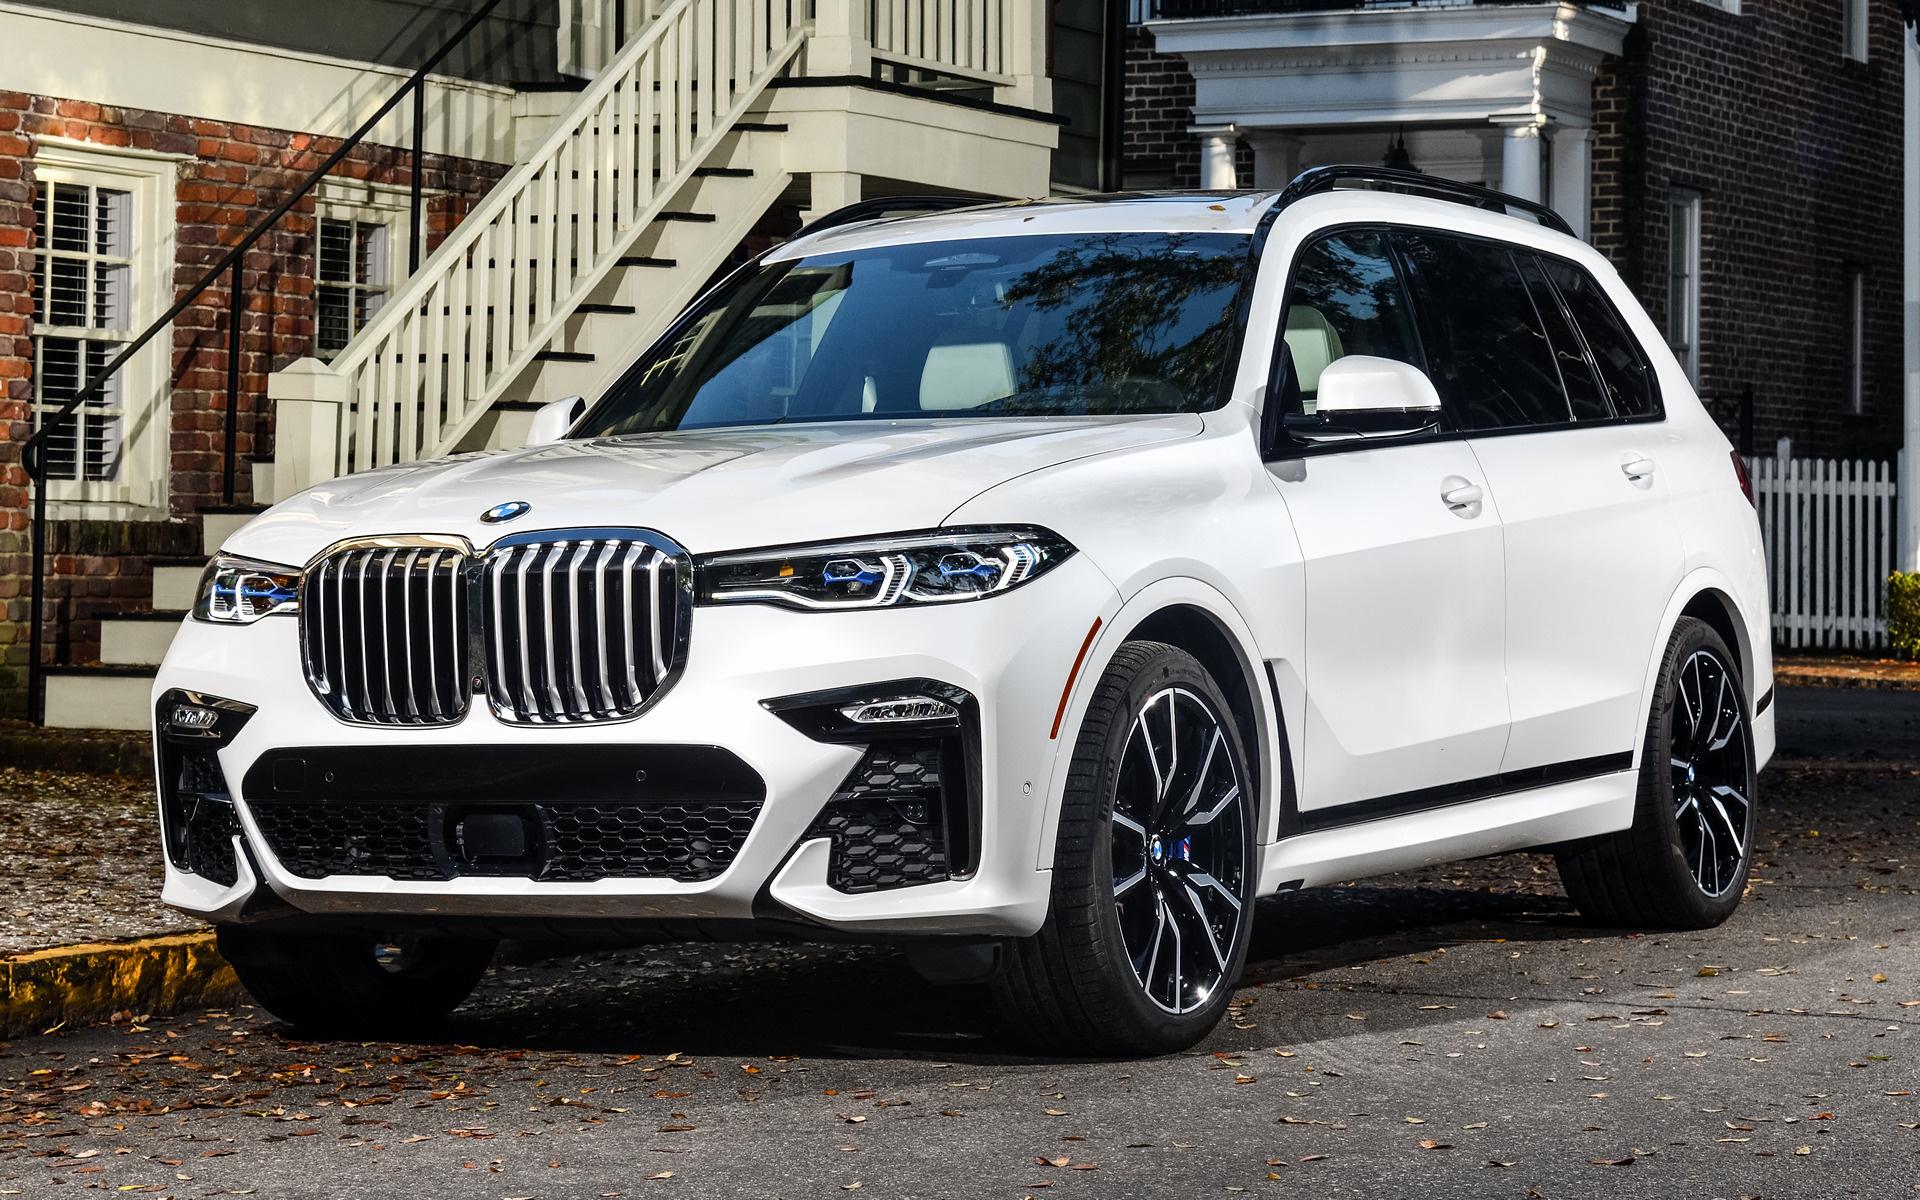 BMW X7 M Sport (US) and HD Image